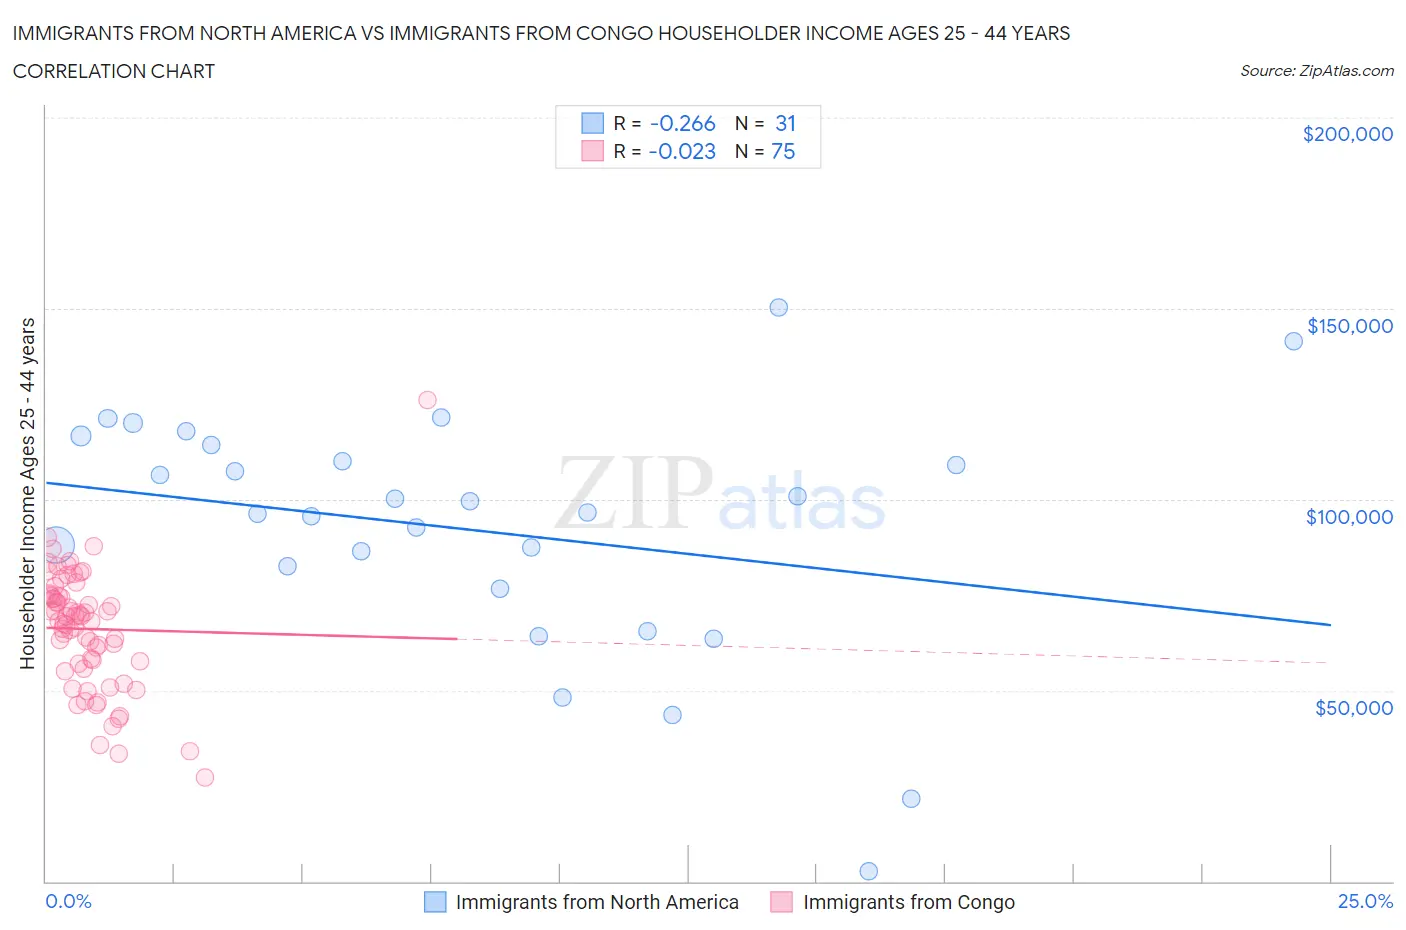 Immigrants from North America vs Immigrants from Congo Householder Income Ages 25 - 44 years